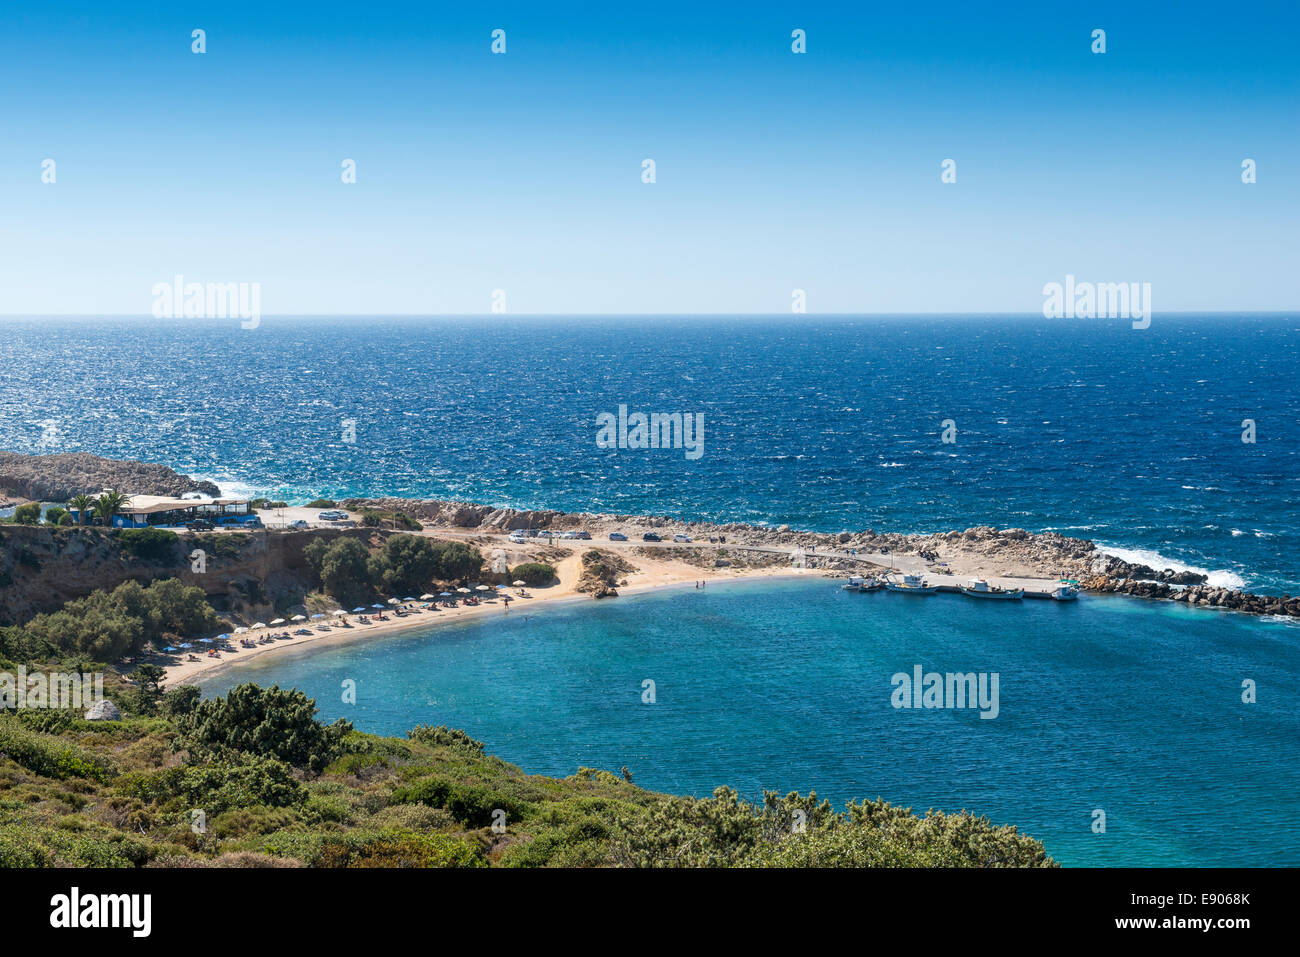 Panoramic view over Limionas and the Mediterranean sea, island of Kos, Greece Stock Photo